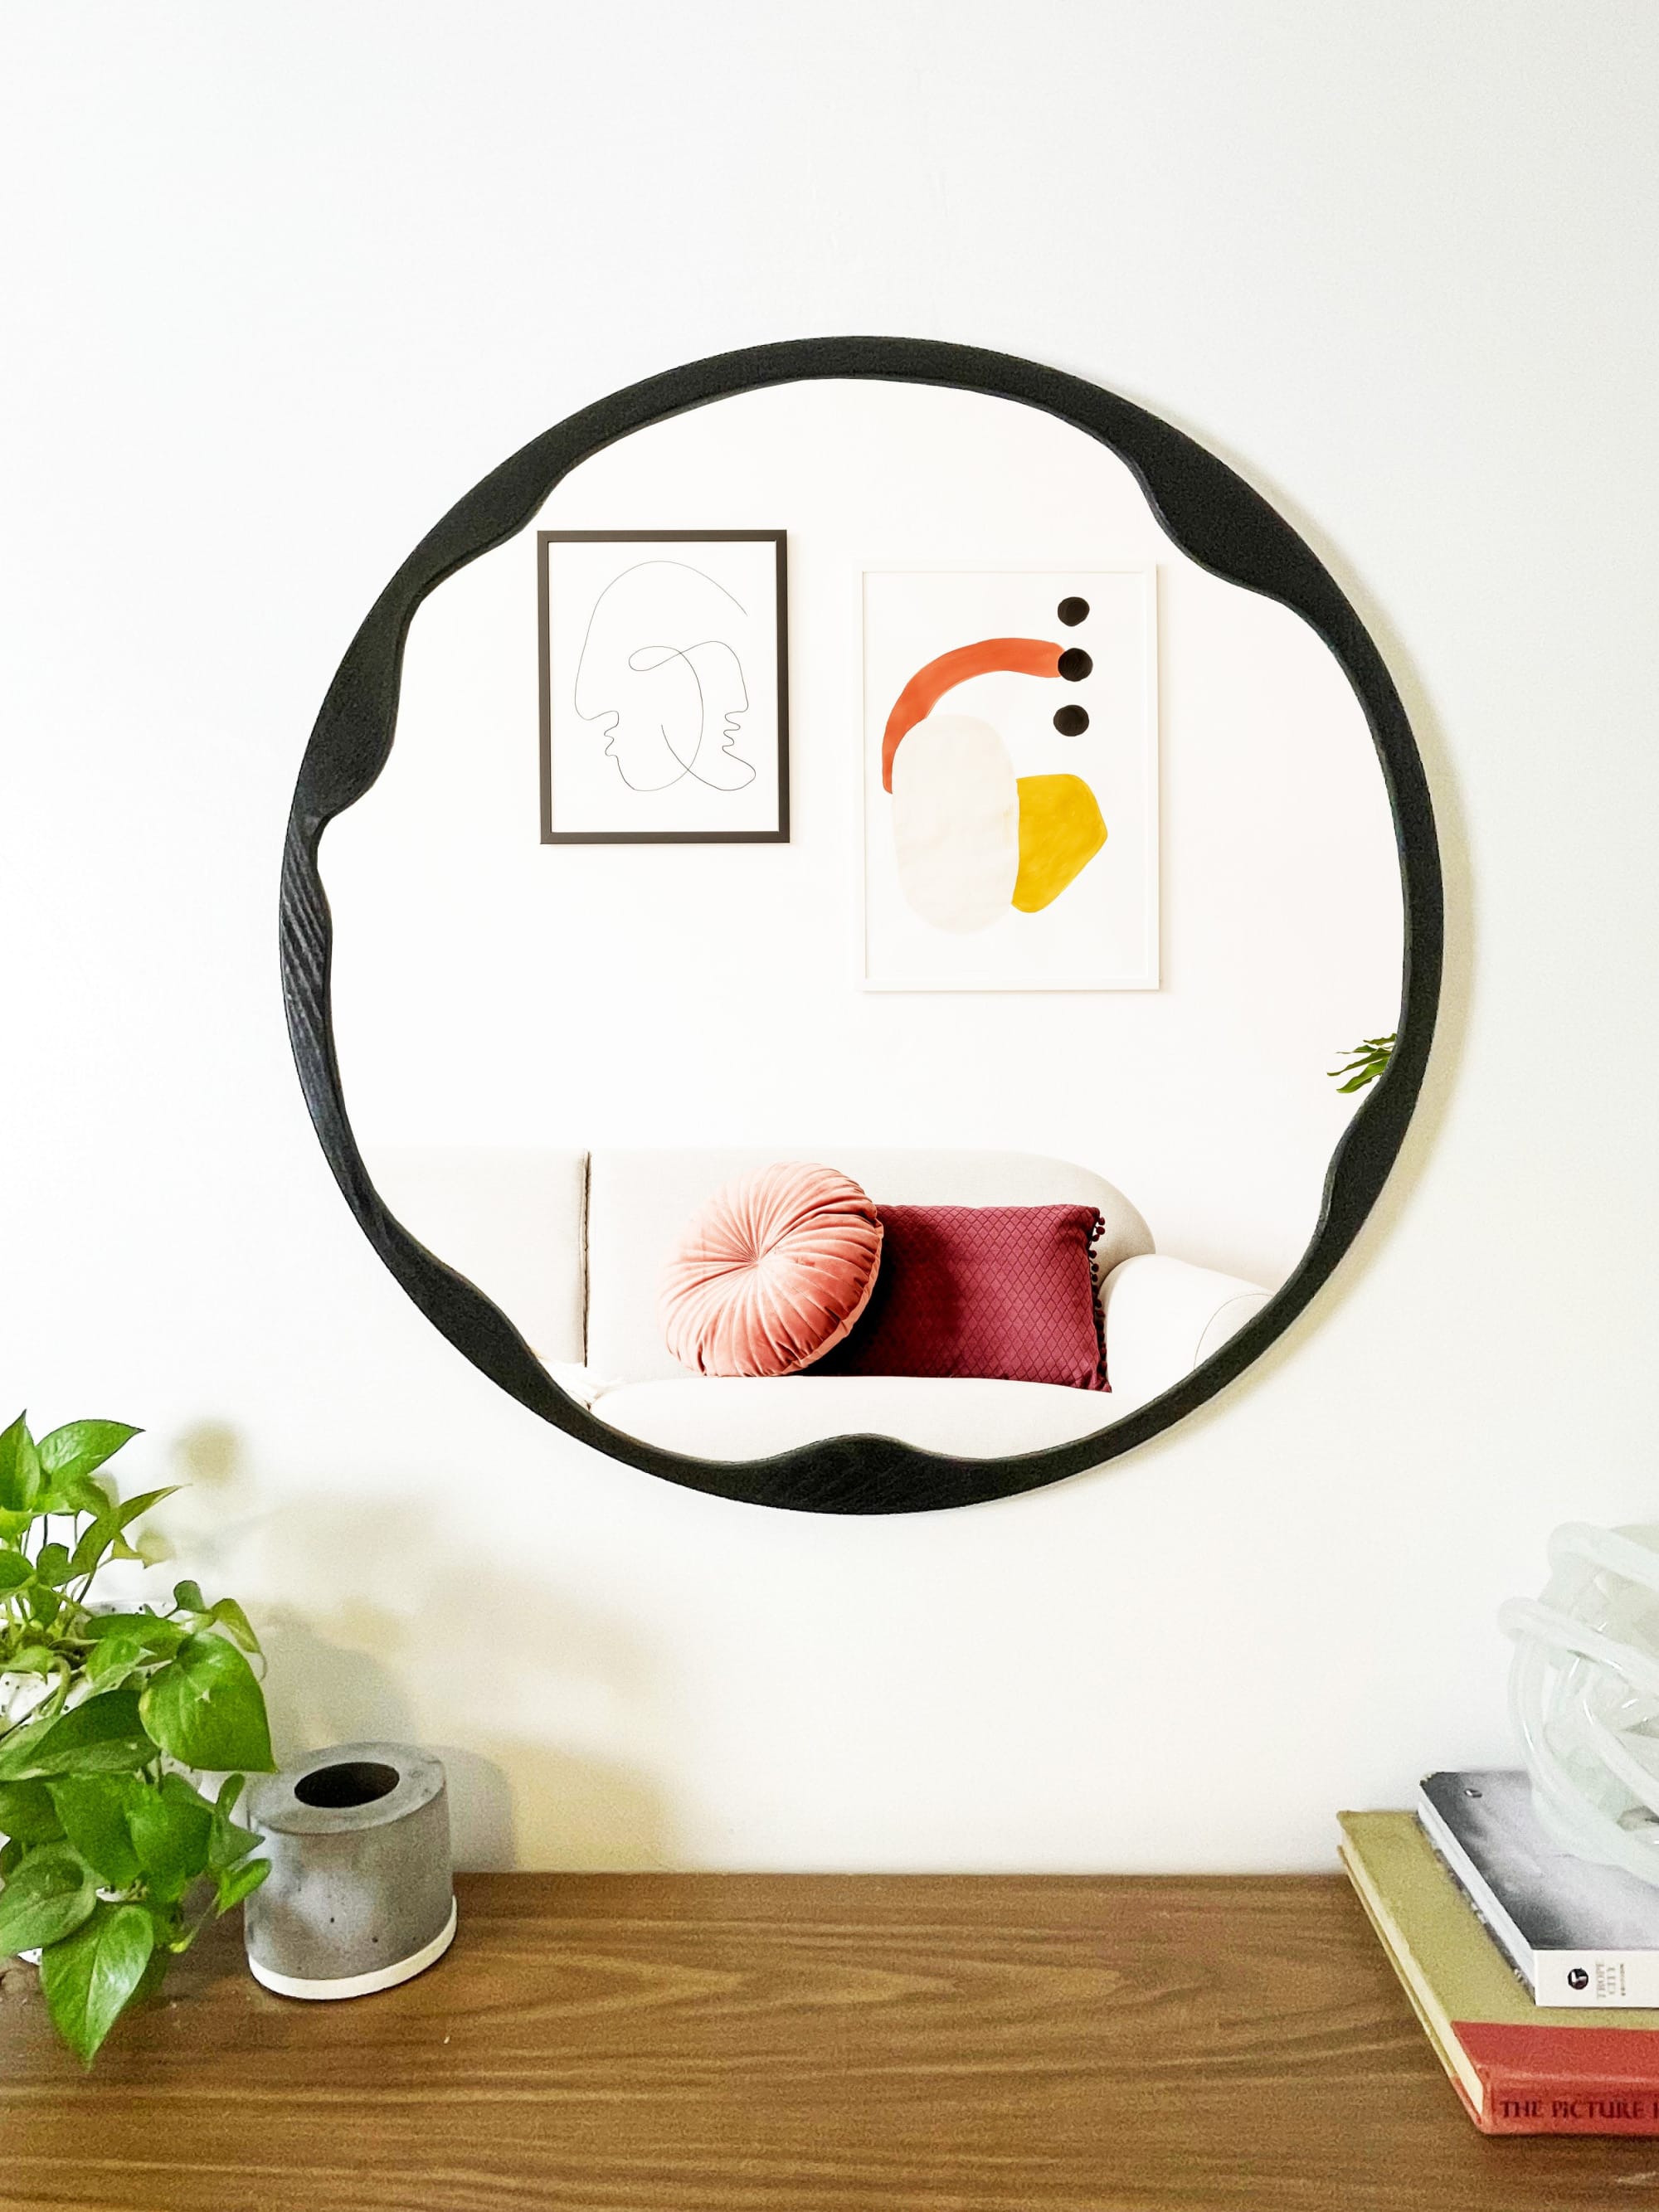 Round Mirrors Are Our Latest Decor Obsession: Here Are 8 to Shop Now